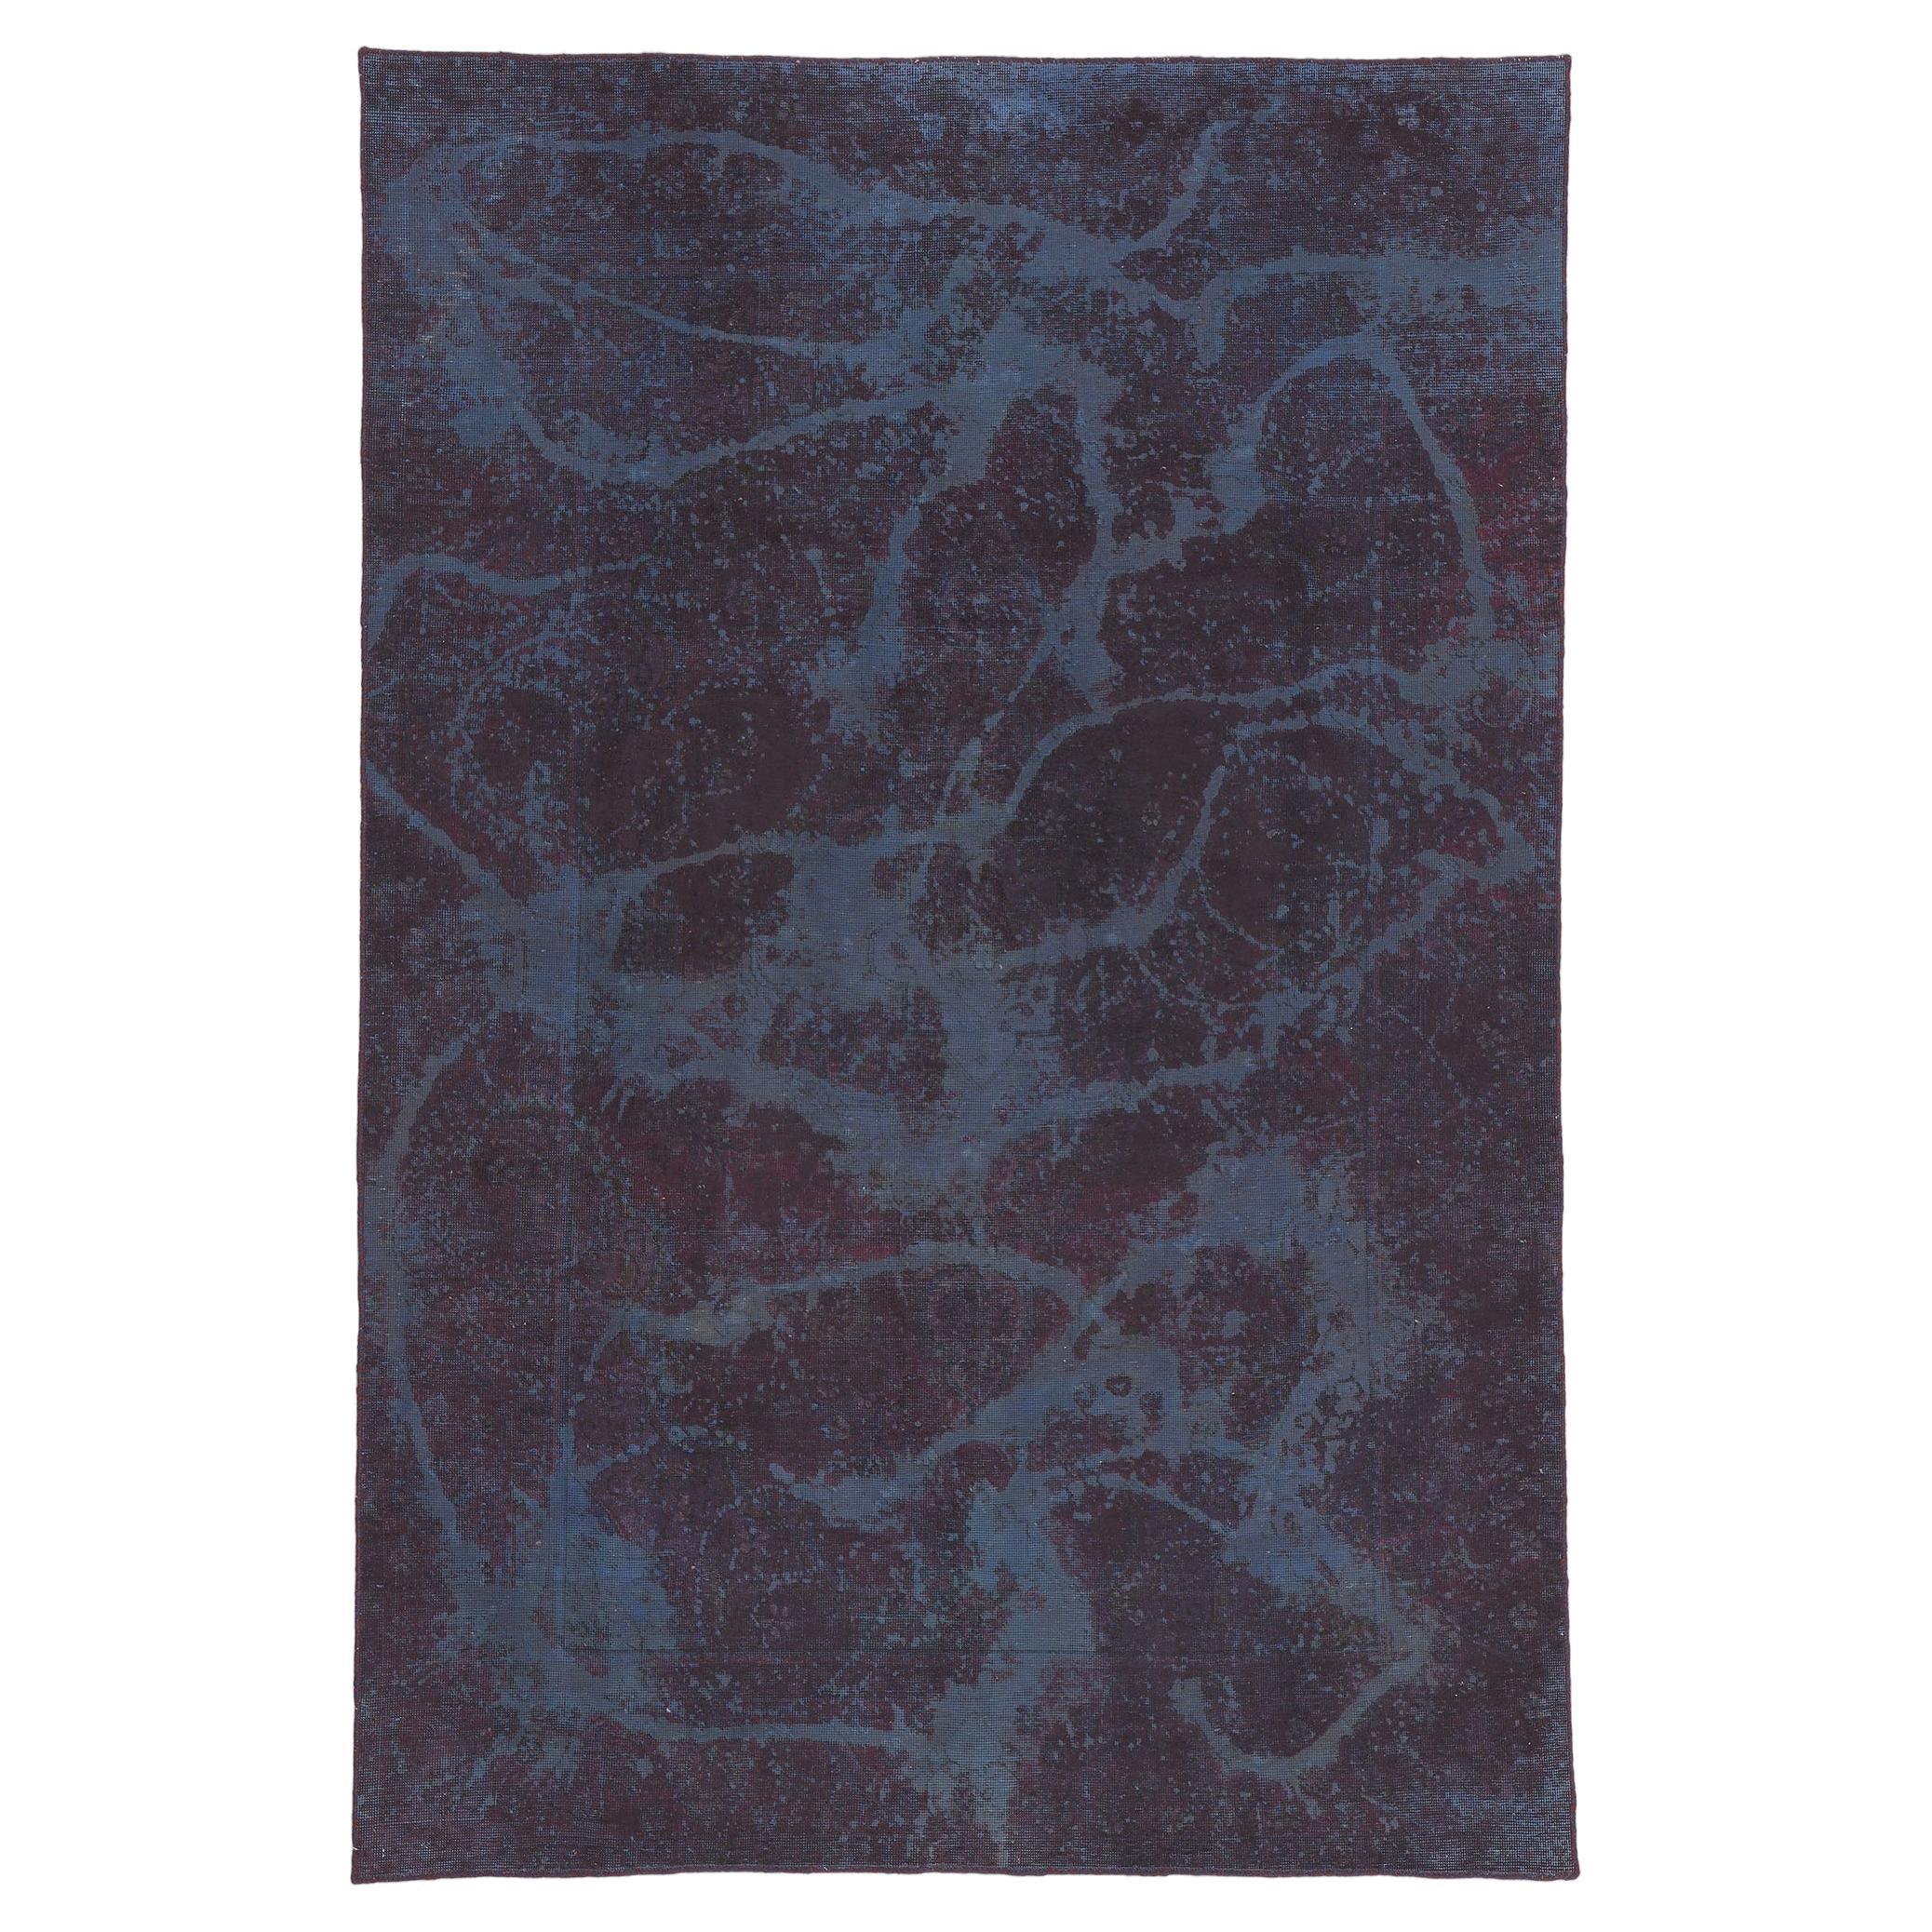 Vintage Turkish Overdyed Rug, Abstract Expressionism Meets Atmospheric Elegance